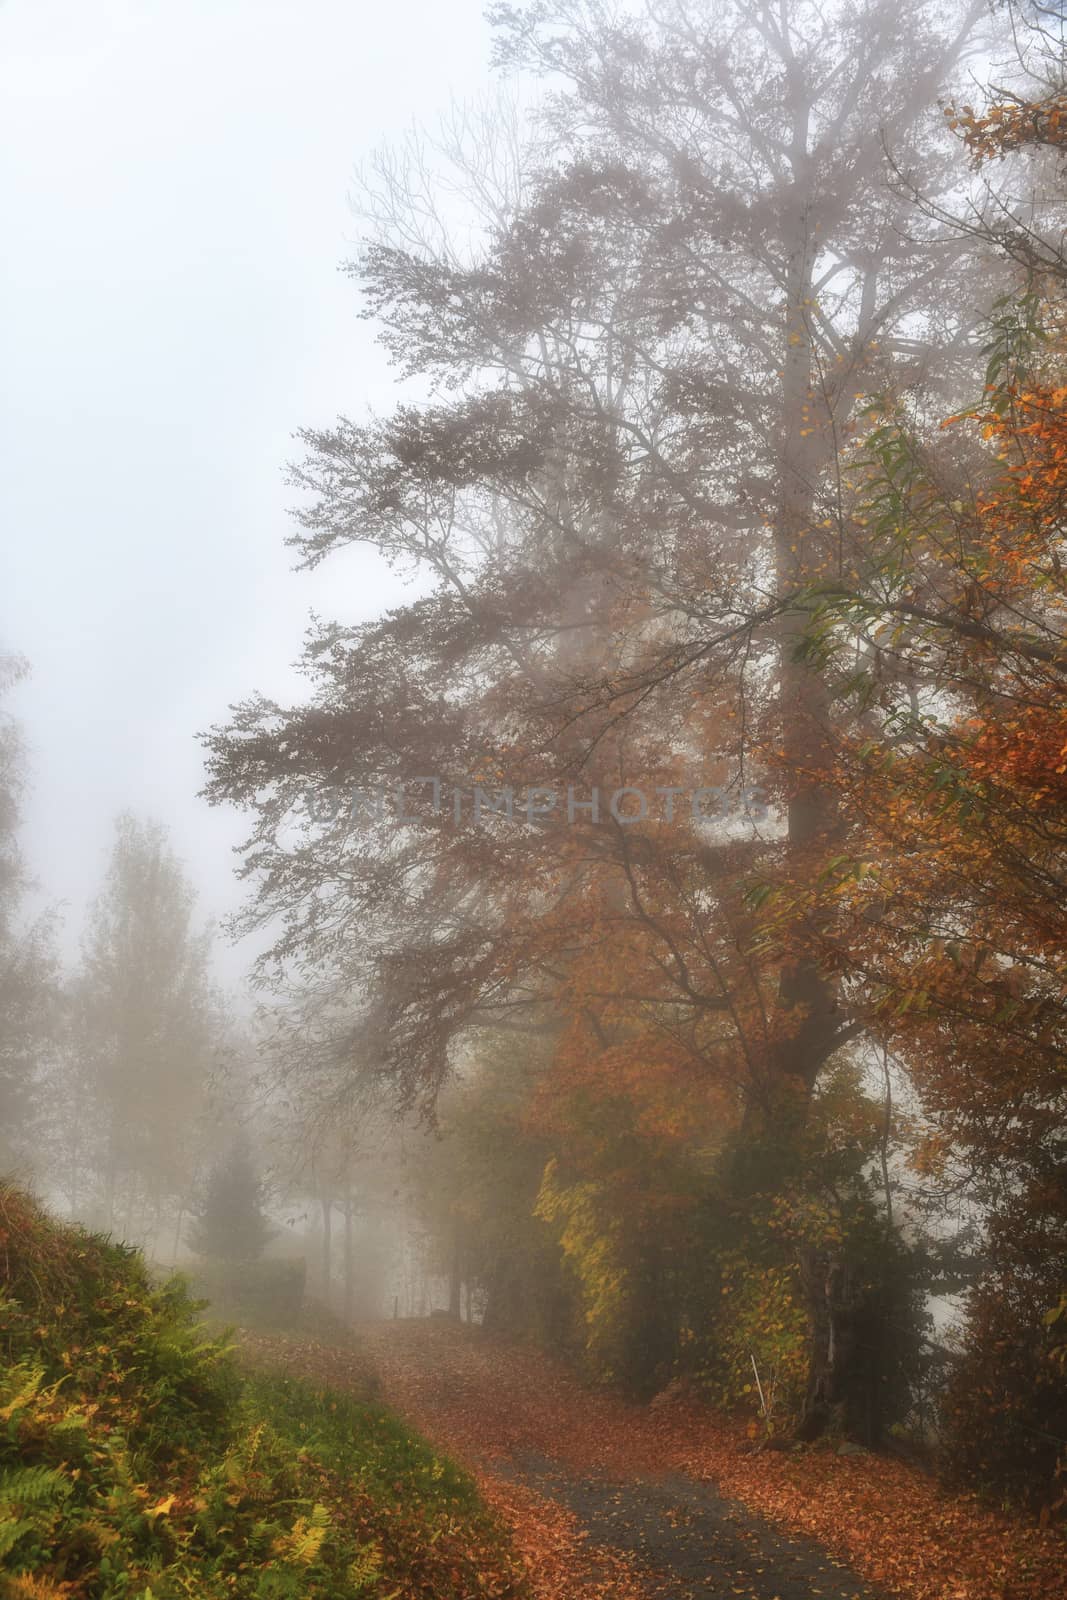 Trees sprout through the light fog in the autumn landscape